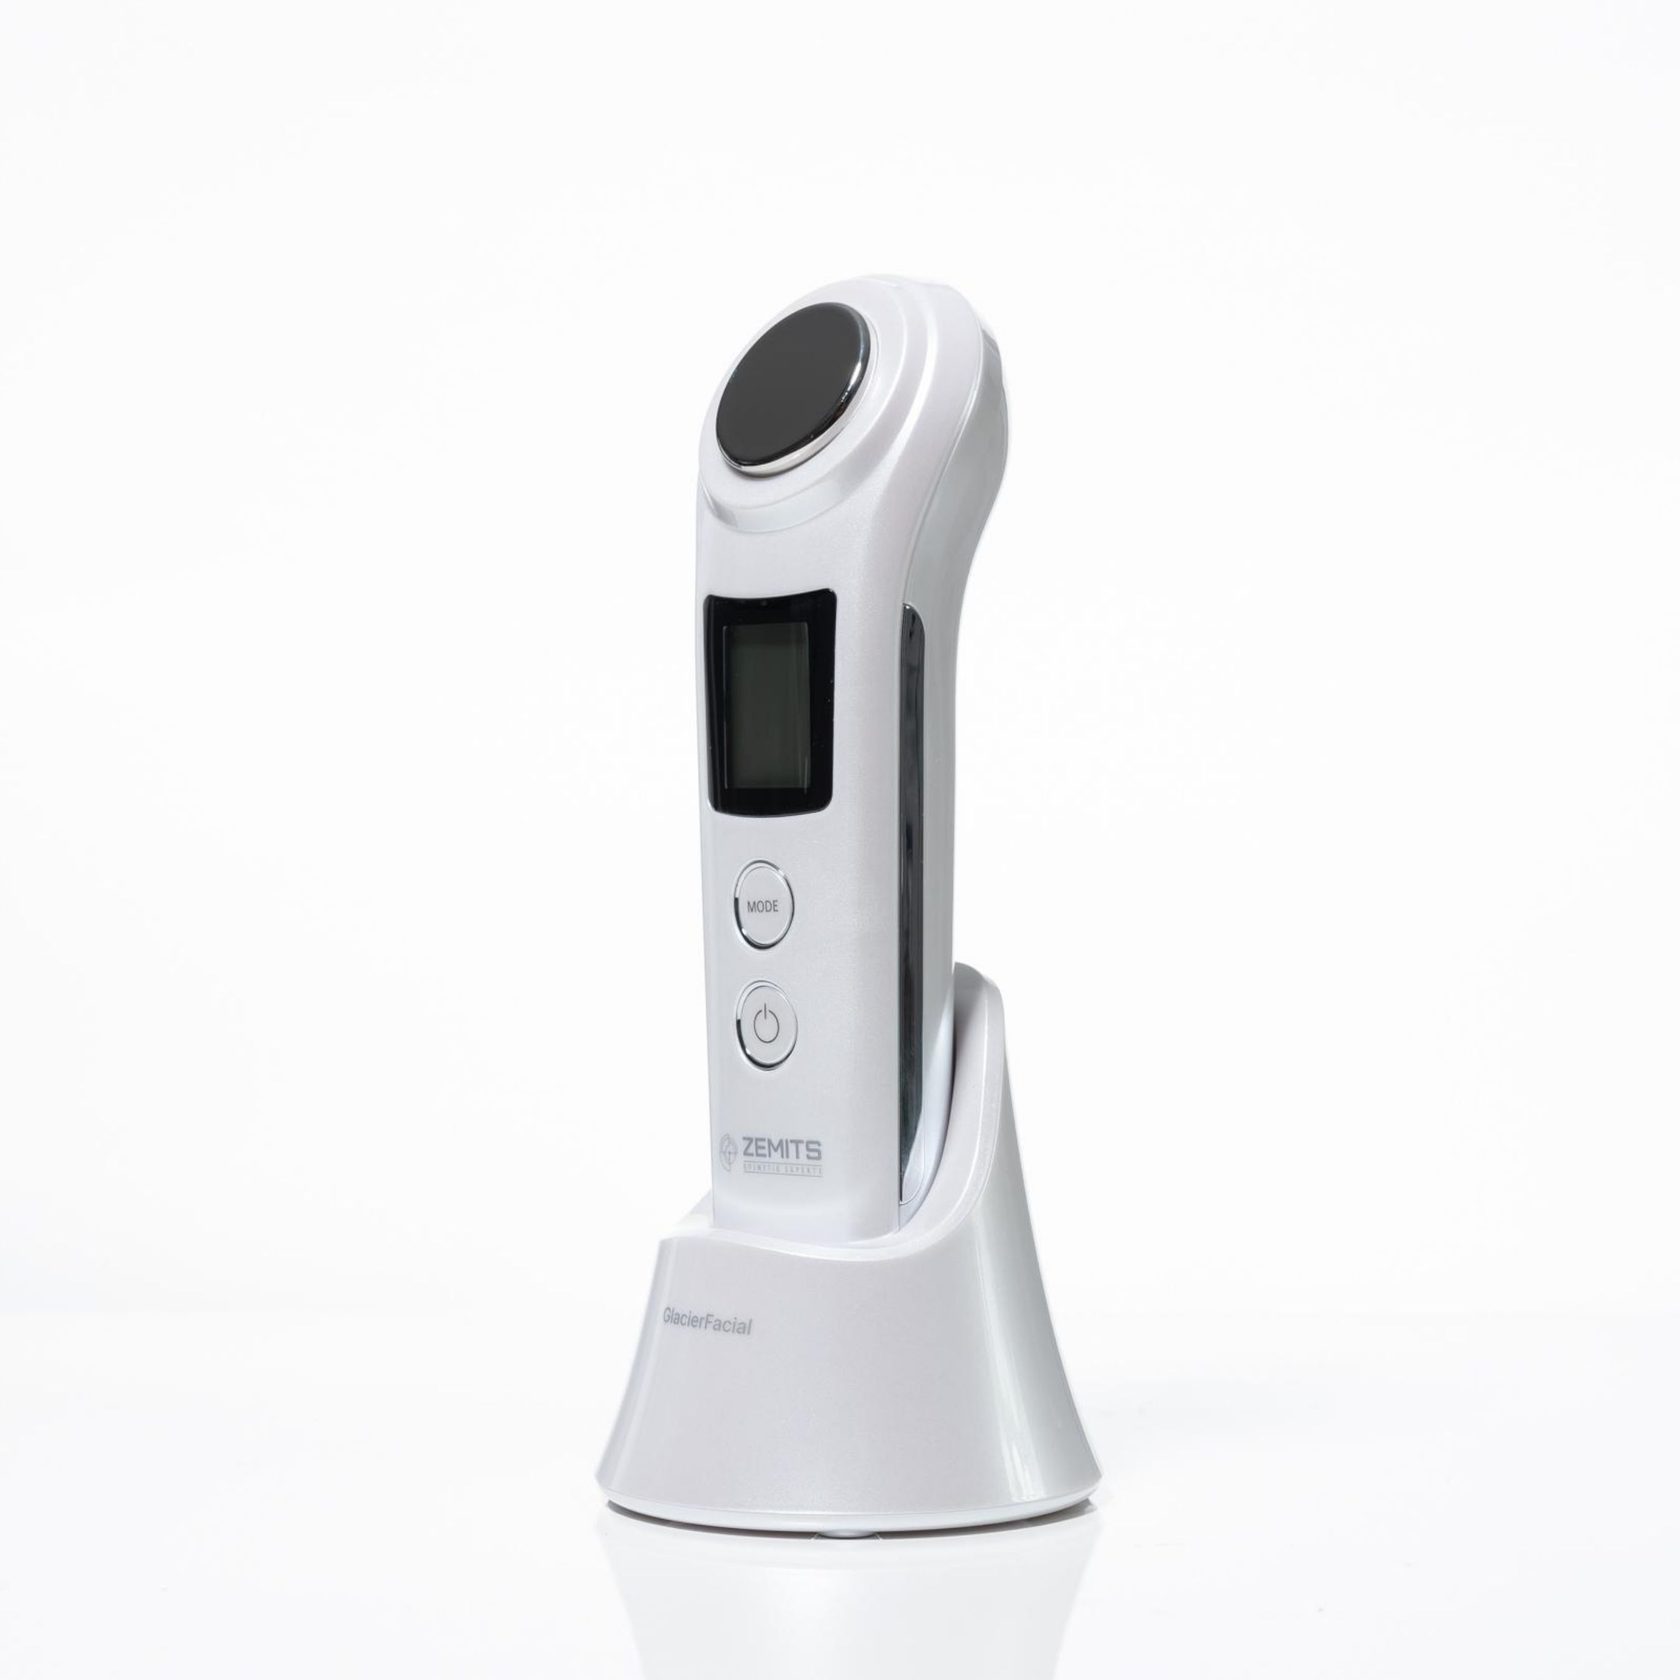 Aesthet Galvanic ION, LED - Your Beauty Gadgets